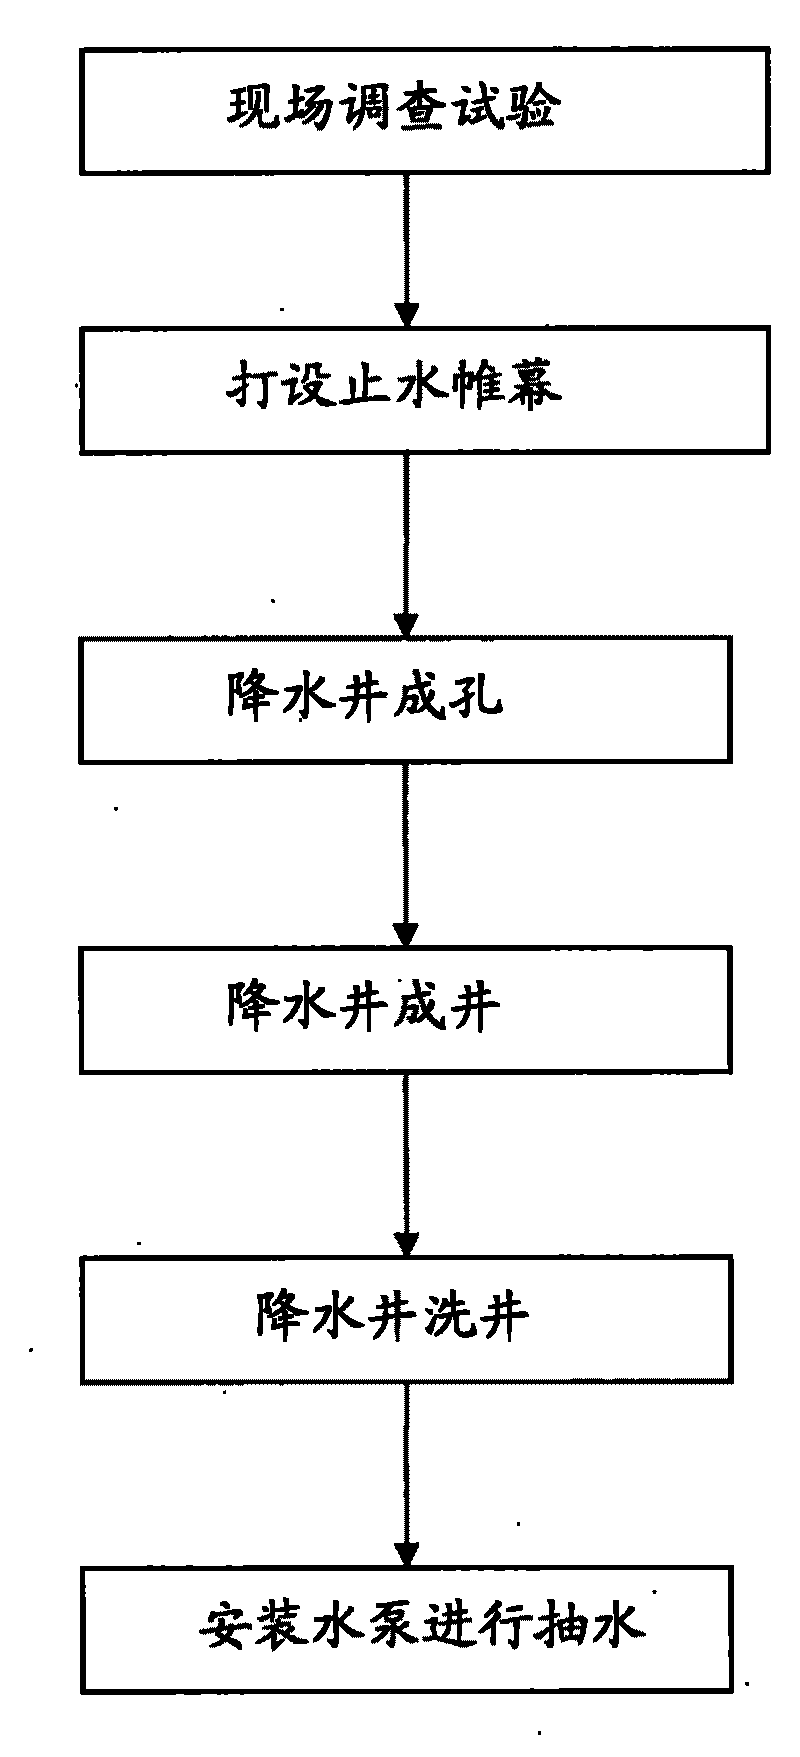 Pressure and water reduction construction method of ultra-deep foundation pit confined water